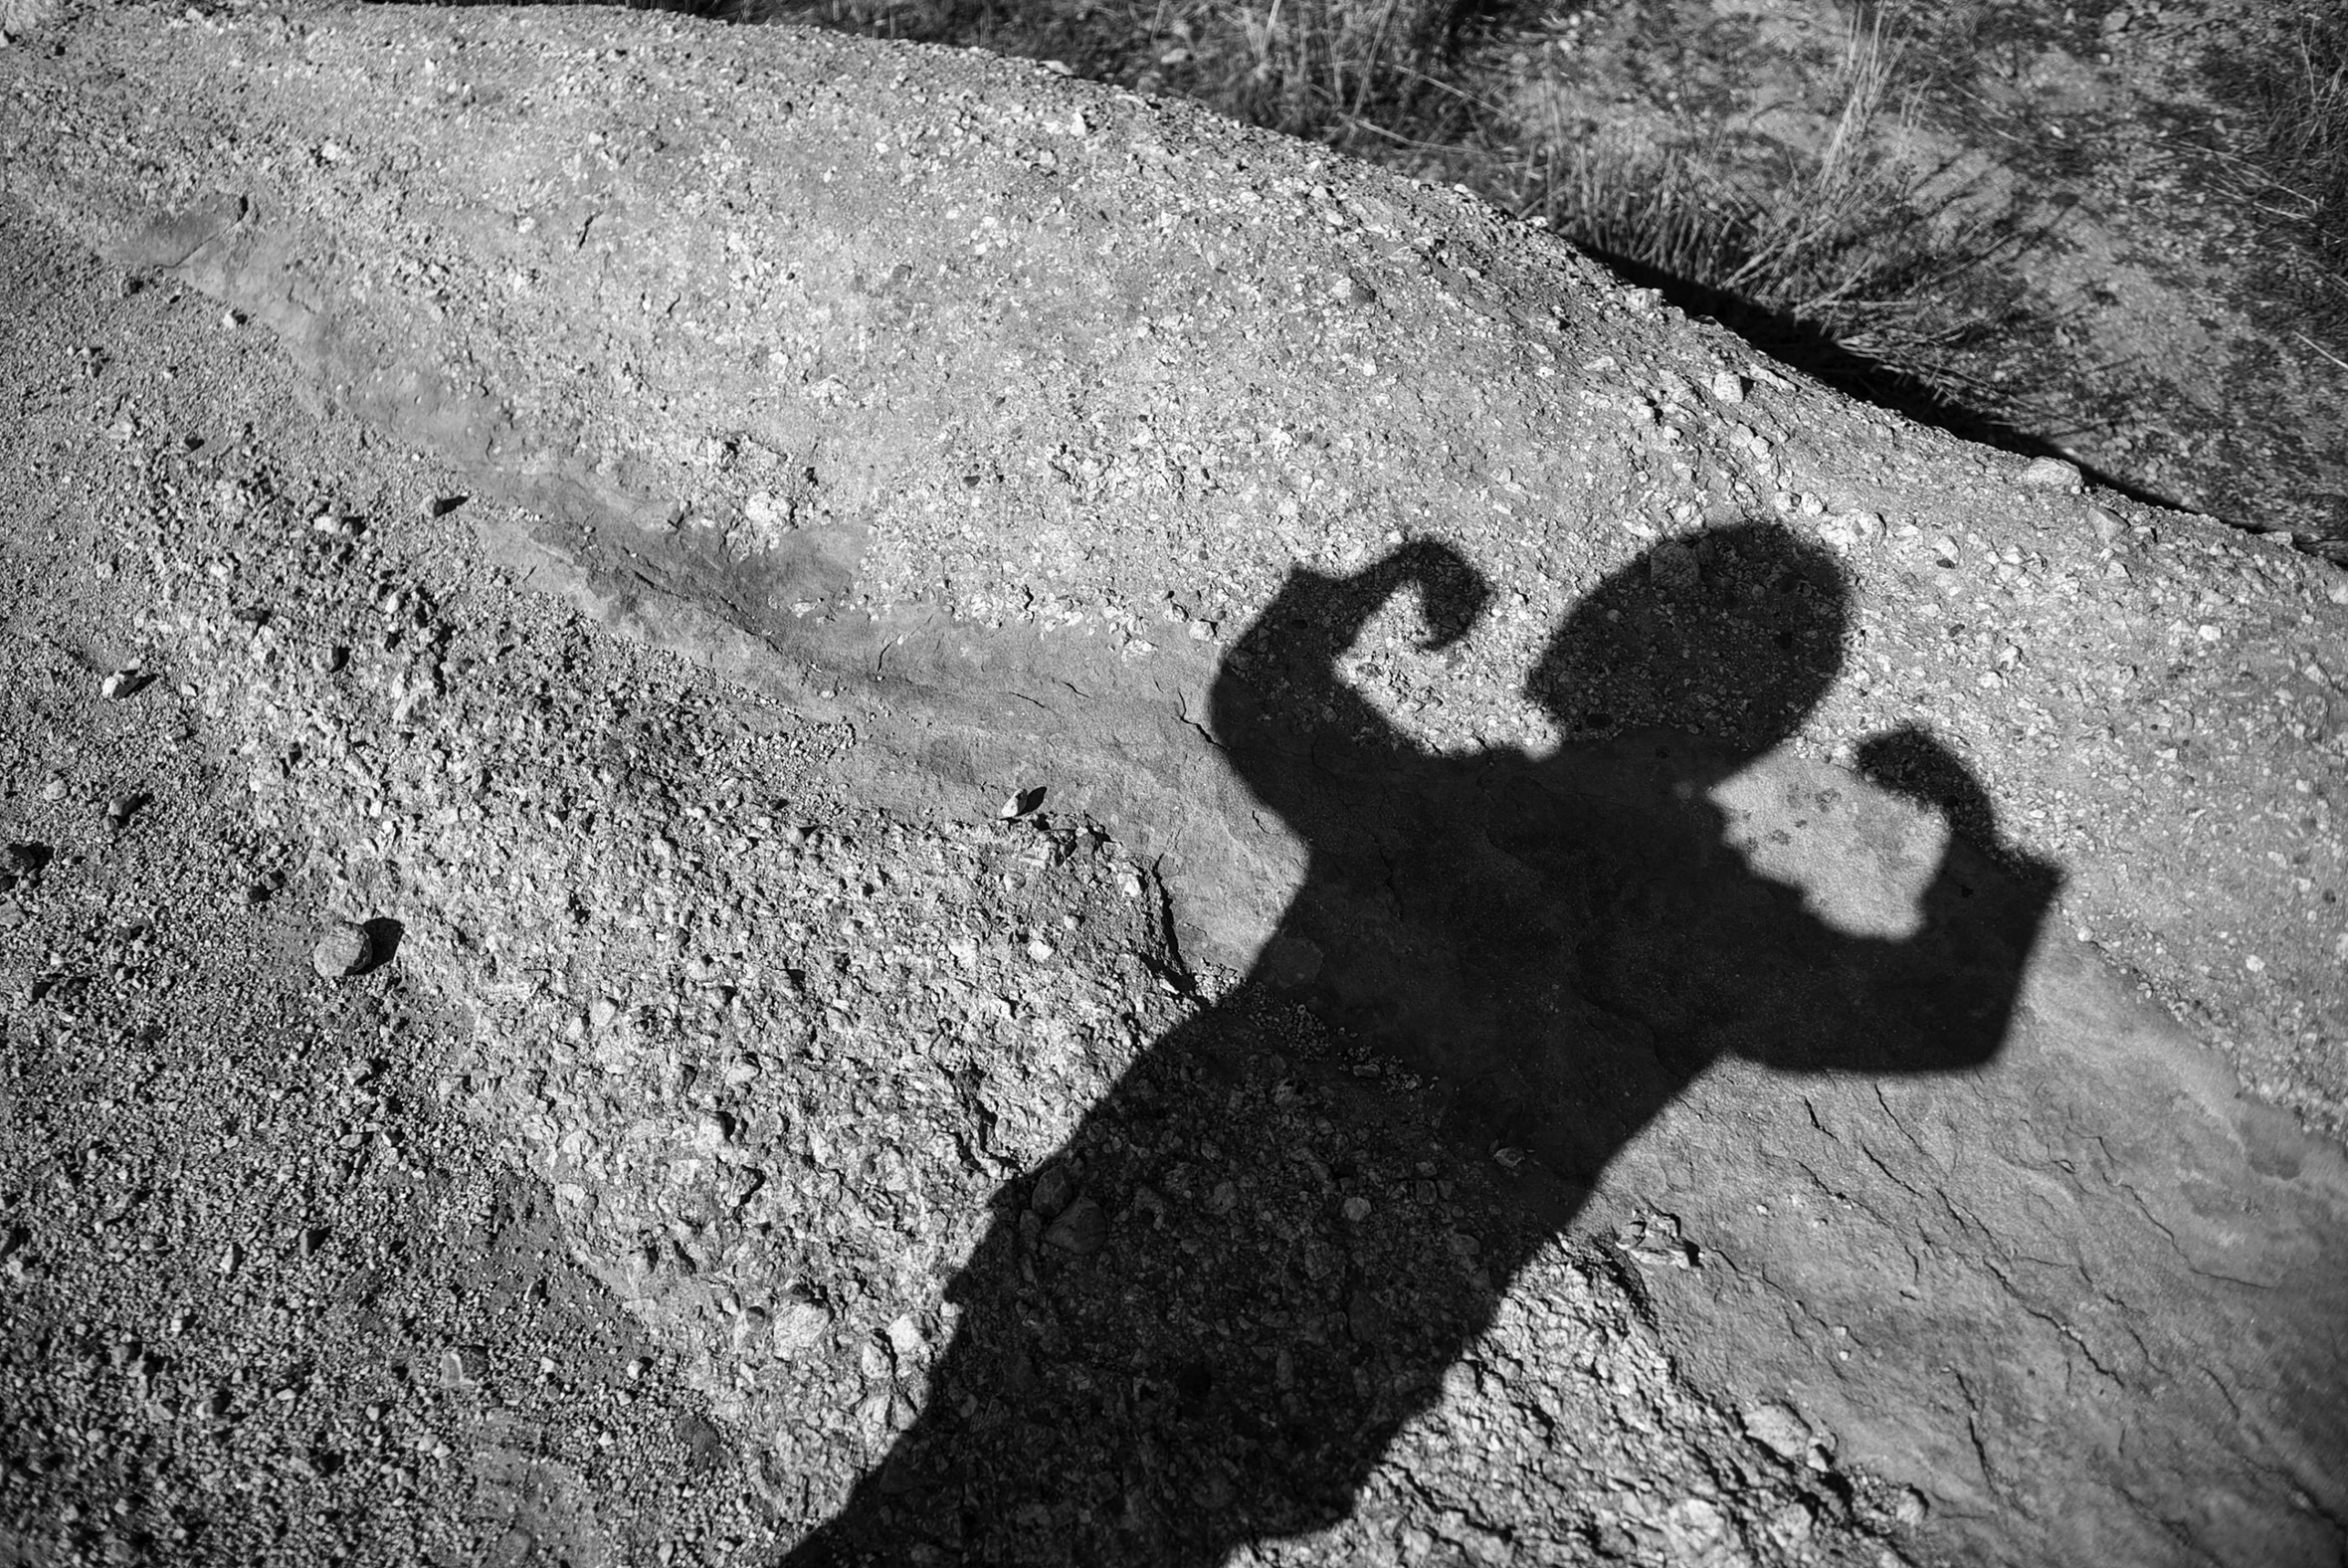 The shadow of a child flexing their arm muscles.